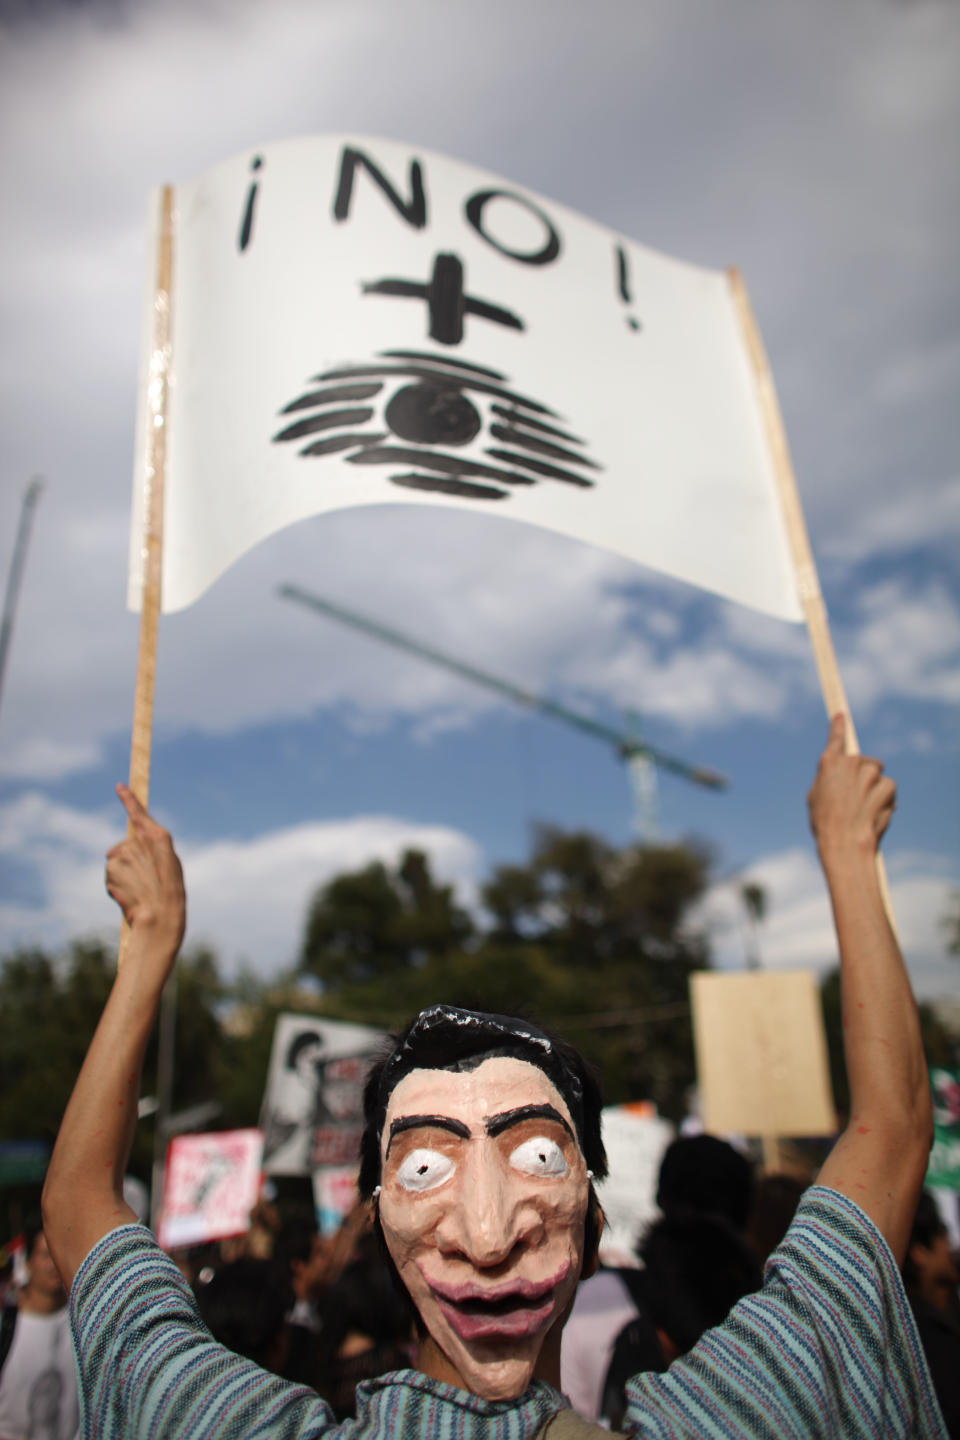 A student holds signs during a demonstration to protest a possible return of the old ruling Institutional Revolutionary Party (PRI) and against what they perceive as a biased coverage by major Mexican TV networks directed in favor of PRI's candidate Enrique Pena Nieto in Mexico City, Wednesday, May 23, 2012. Mexico will hold presidential elections on July 1. The banner reads in Spanish "No More Televisa". Mexico will hold presidential elections on July 1. (AP Photo/Alexandre Meneghini)